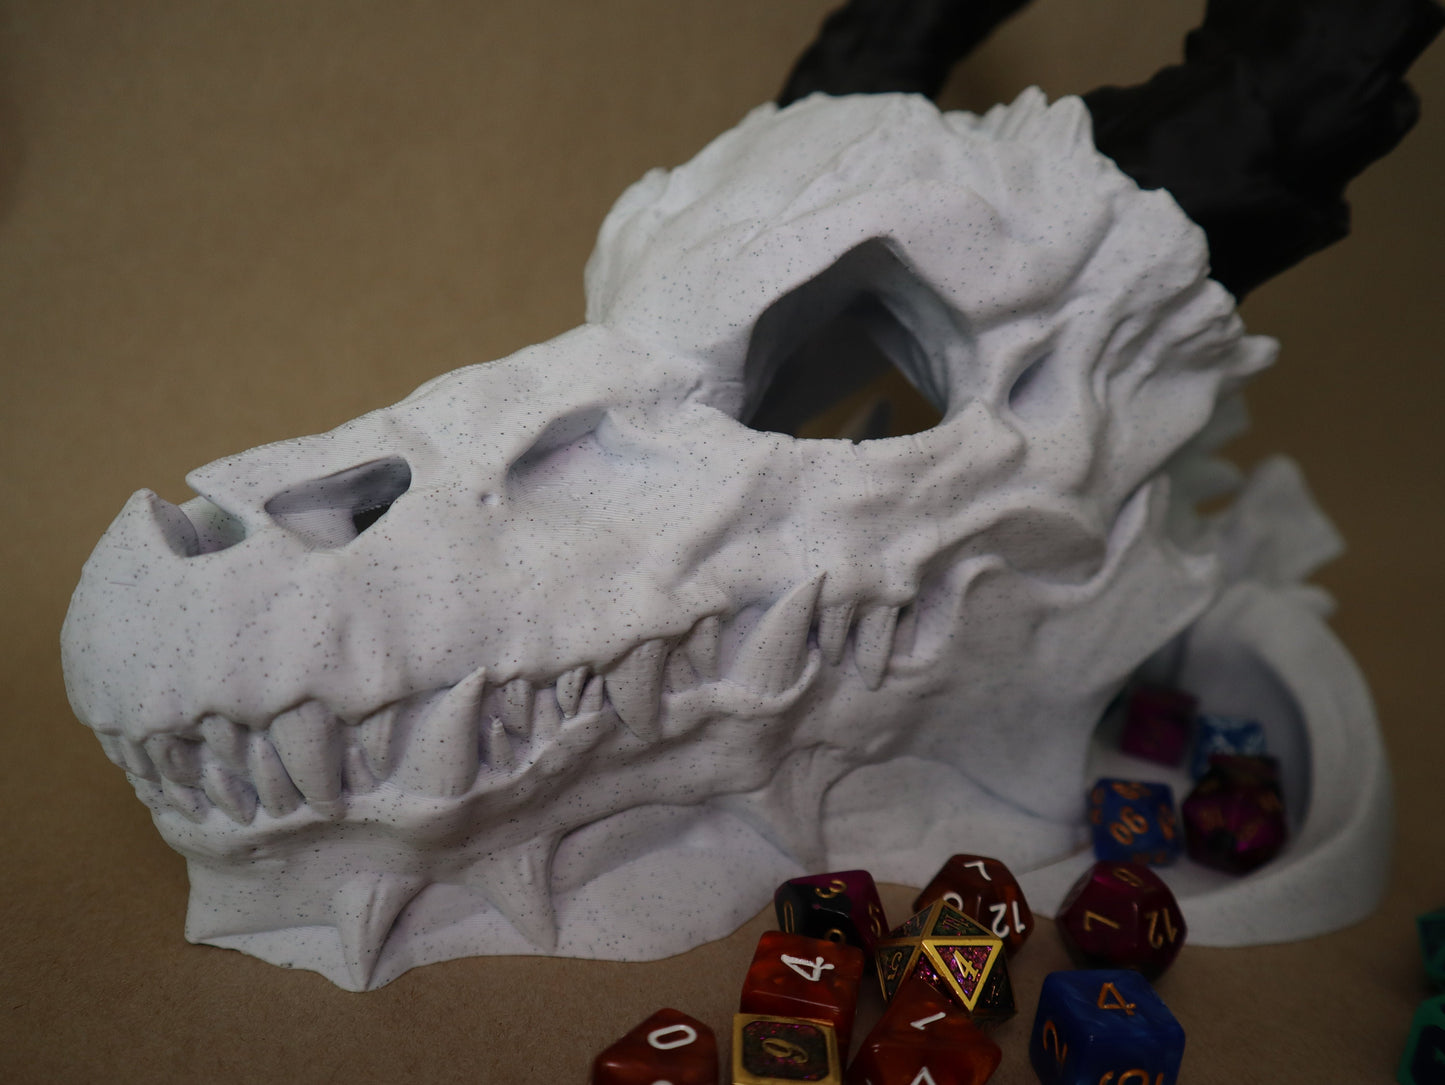 Dragon Skull Dice Tower, Dungeons & Dragons, RPG Fantasy, RPG, DND Accessories, Tabletop Fantasy, Dice Accessories, Display Piece